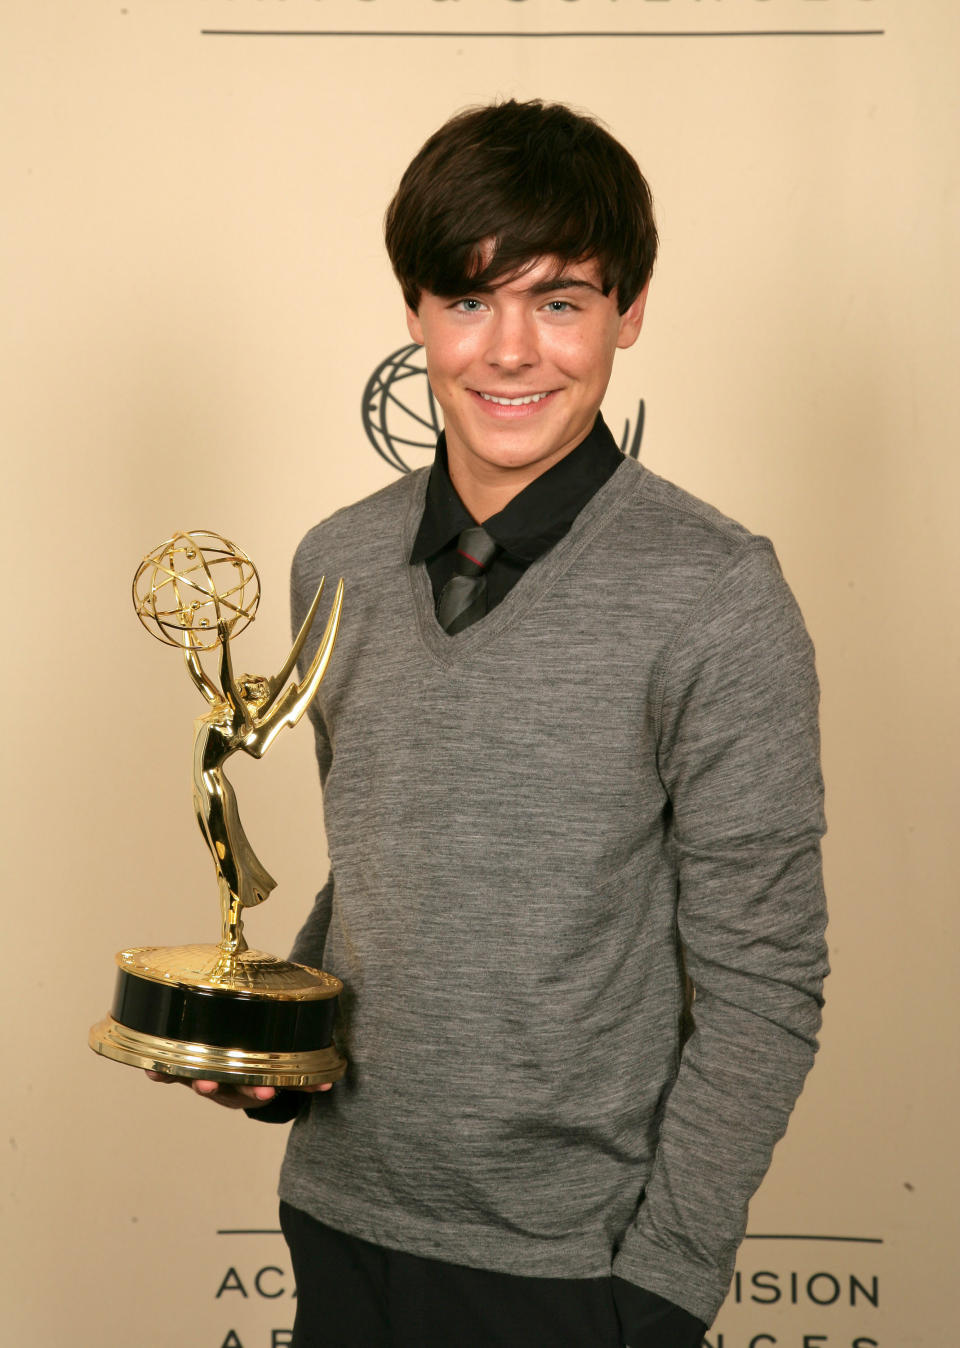 Zac in a long-sleeved sweater, holding an award